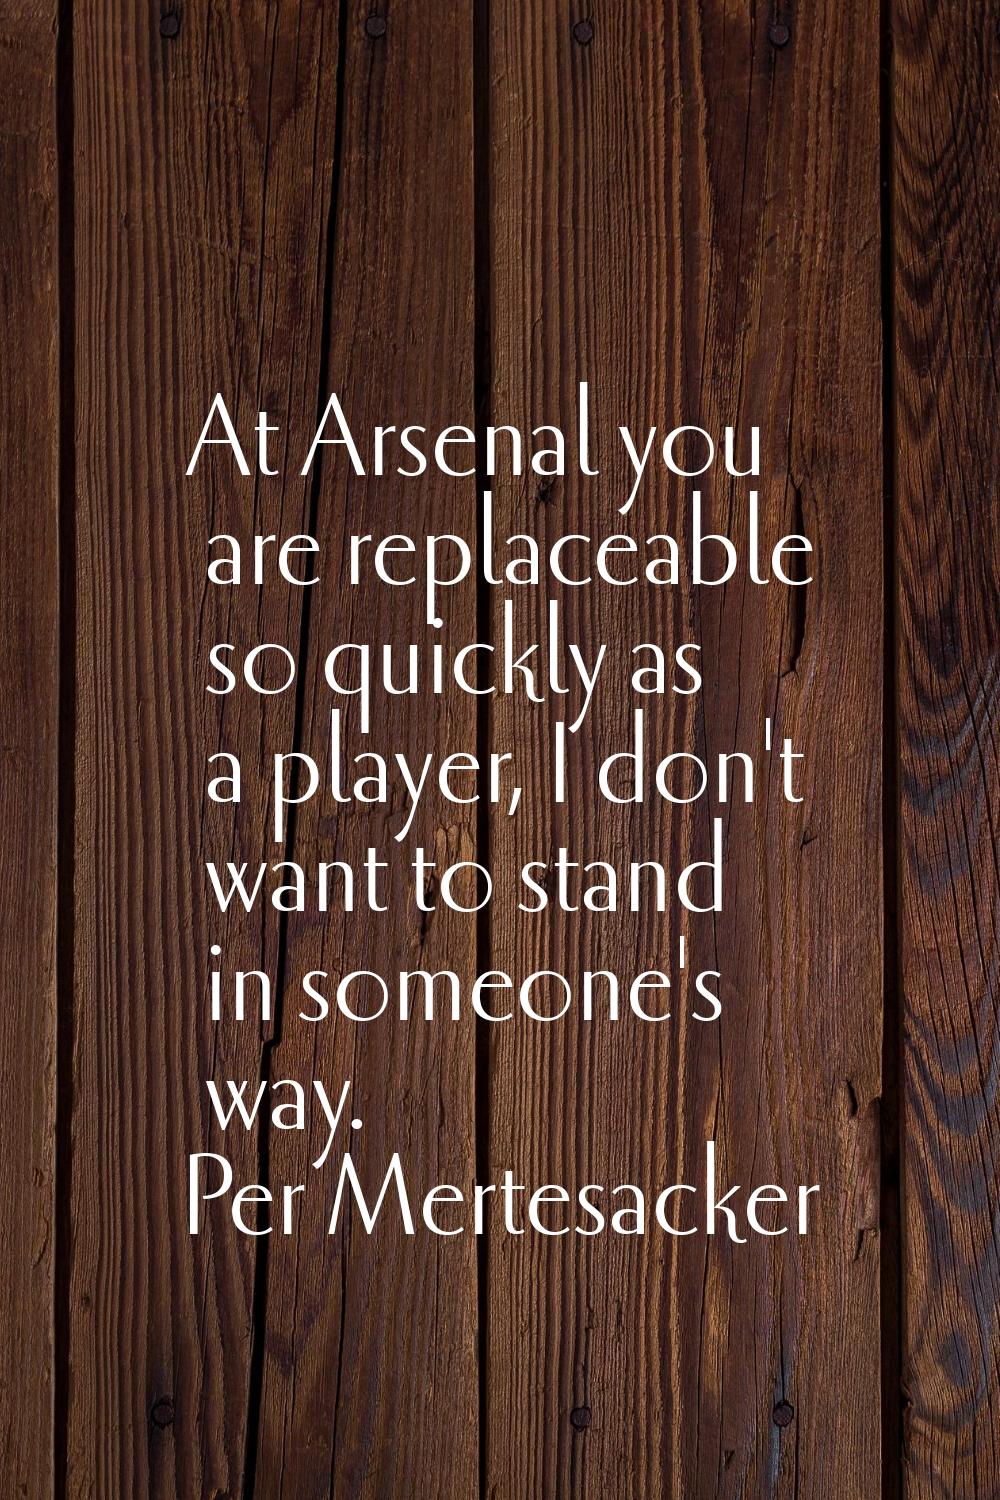 At Arsenal you are replaceable so quickly as a player, I don't want to stand in someone's way.